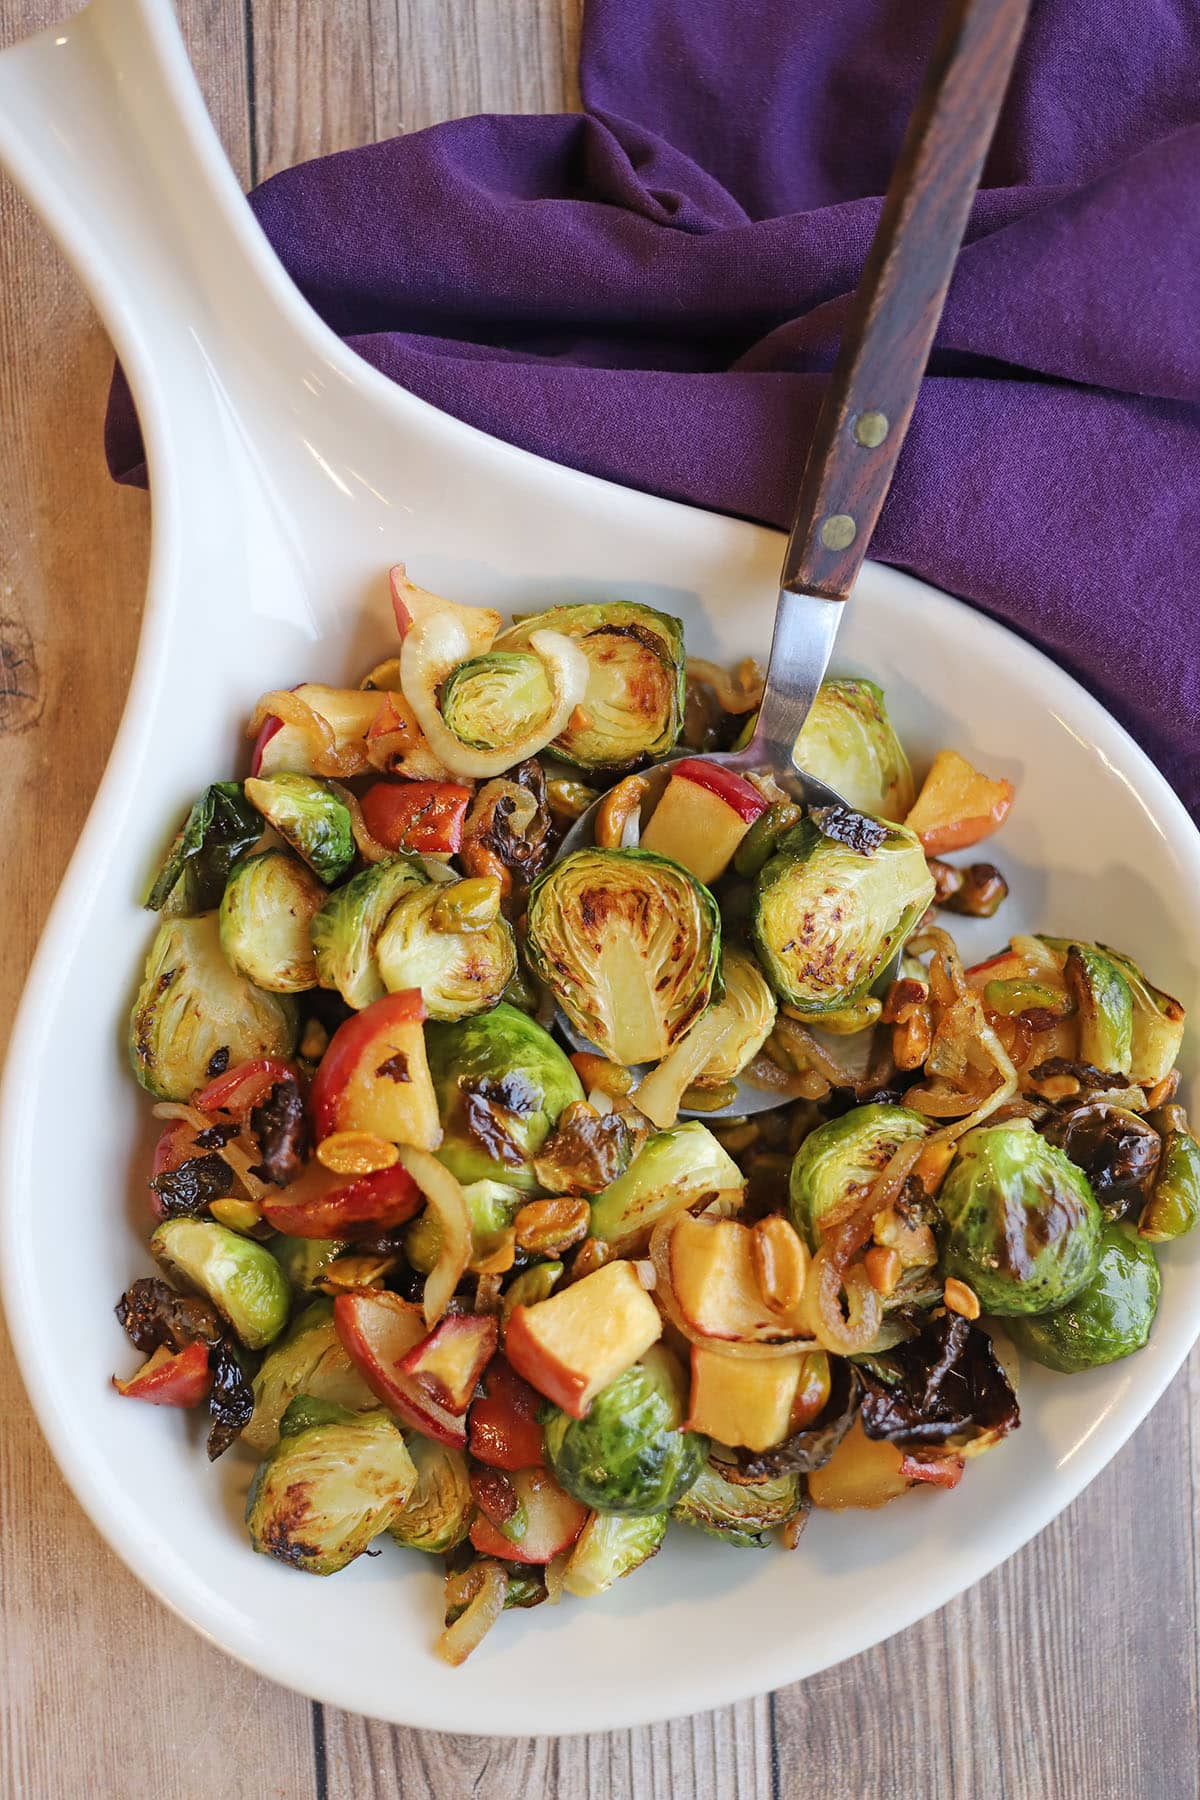 Platter with apples, caramelized onions, pistachios, and Brussels sprouts.